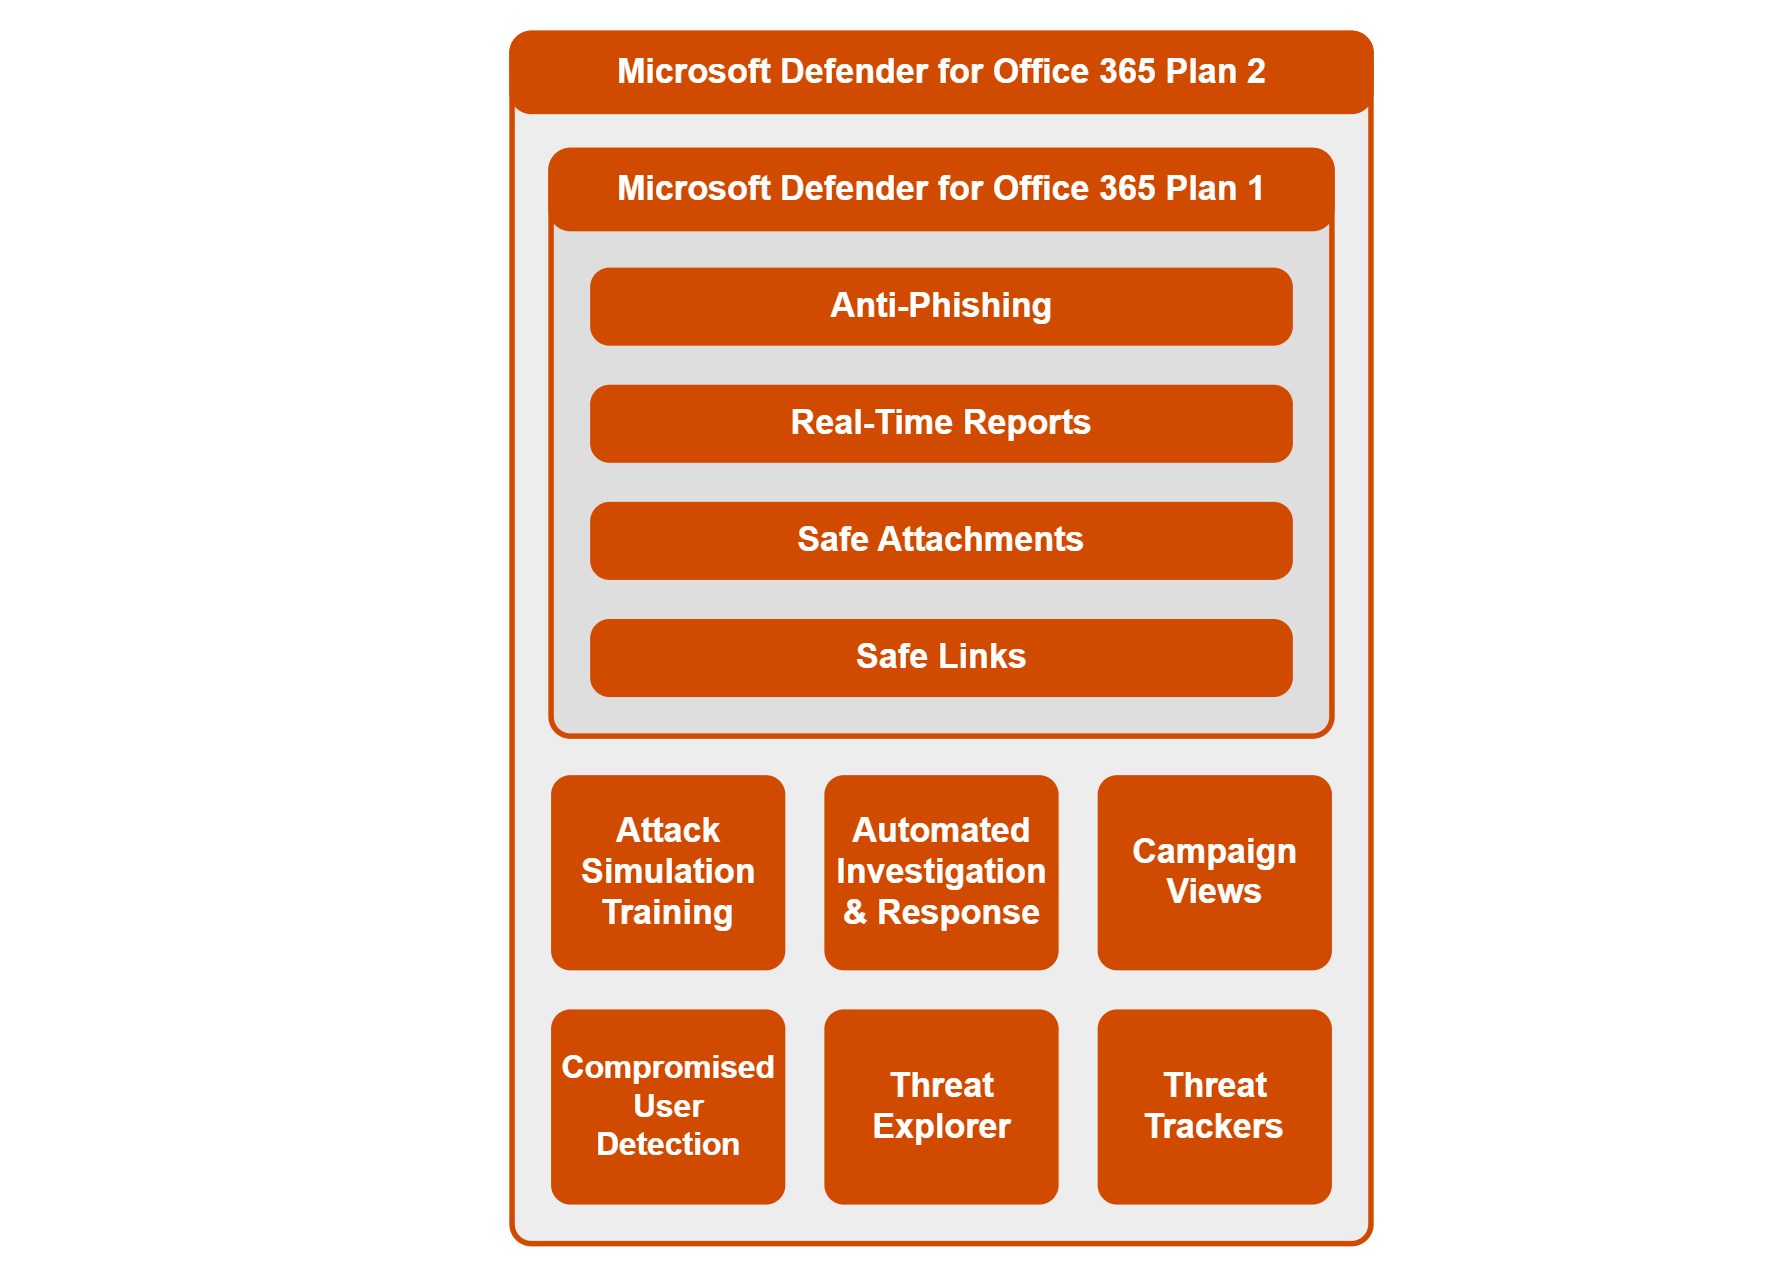 df-o365-service-plan-features.png